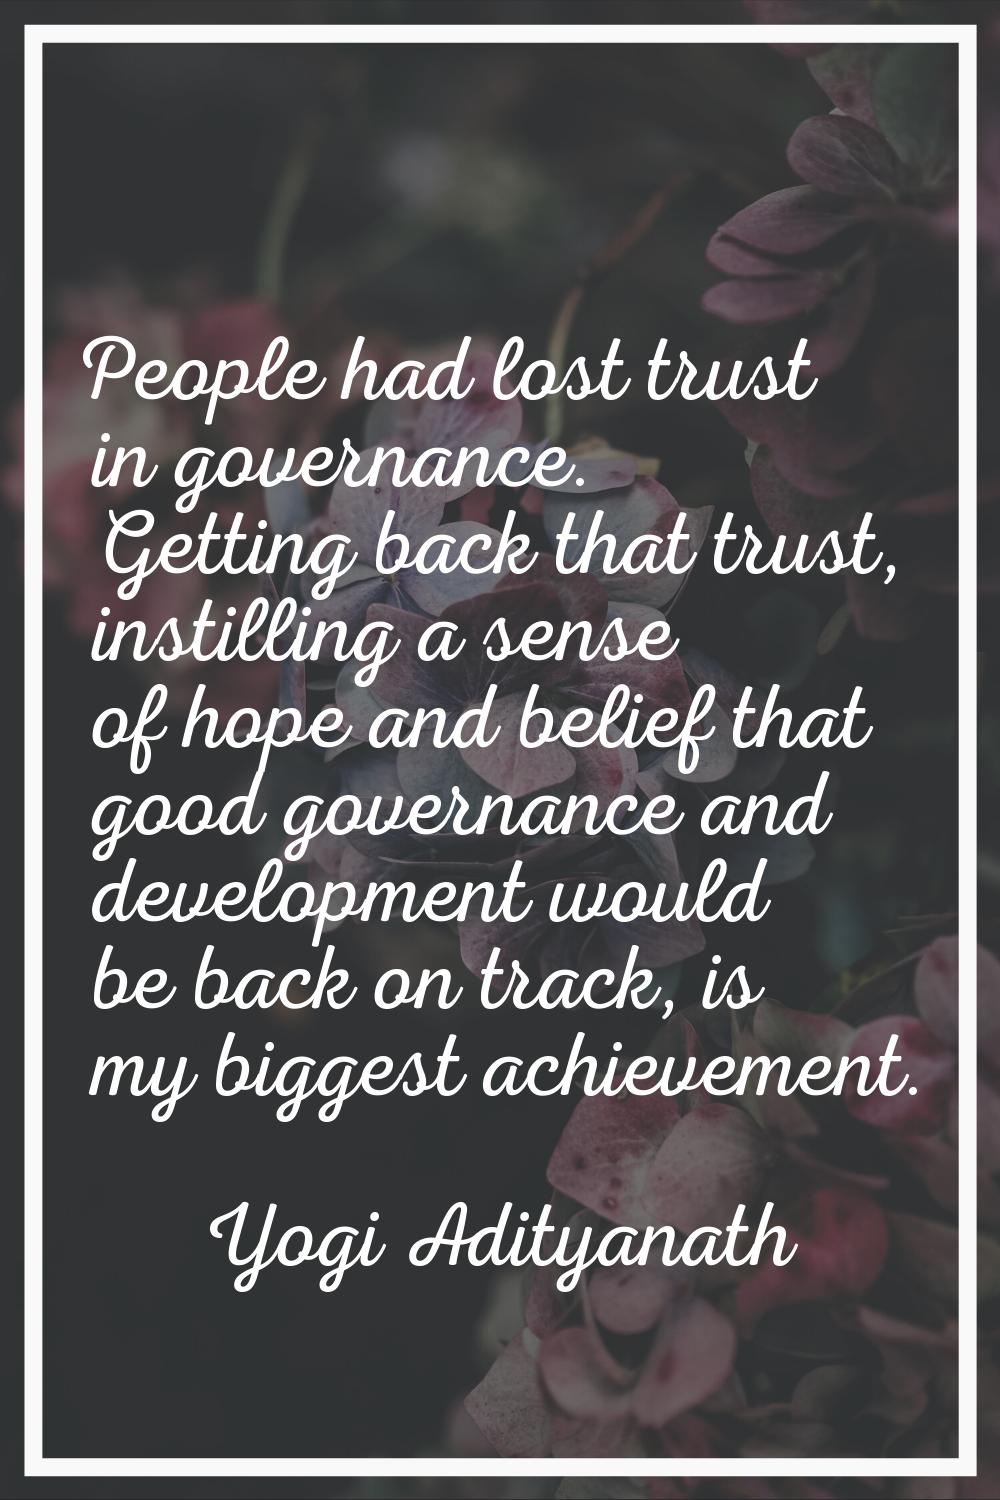 People had lost trust in governance. Getting back that trust, instilling a sense of hope and belief